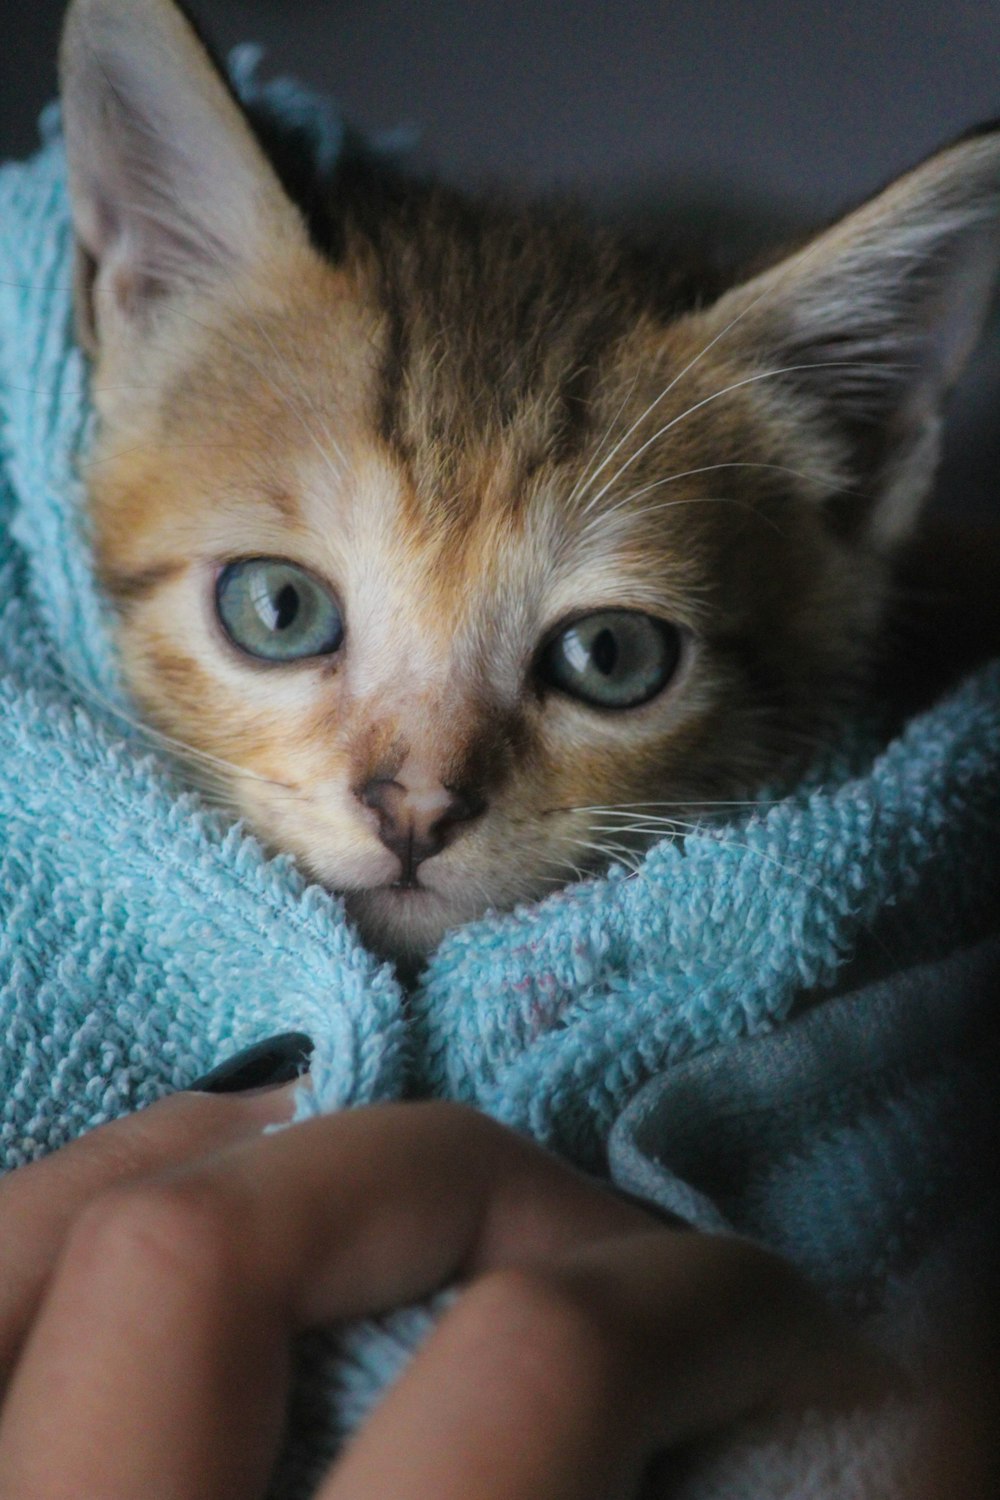 a small kitten is wrapped up in a blanket